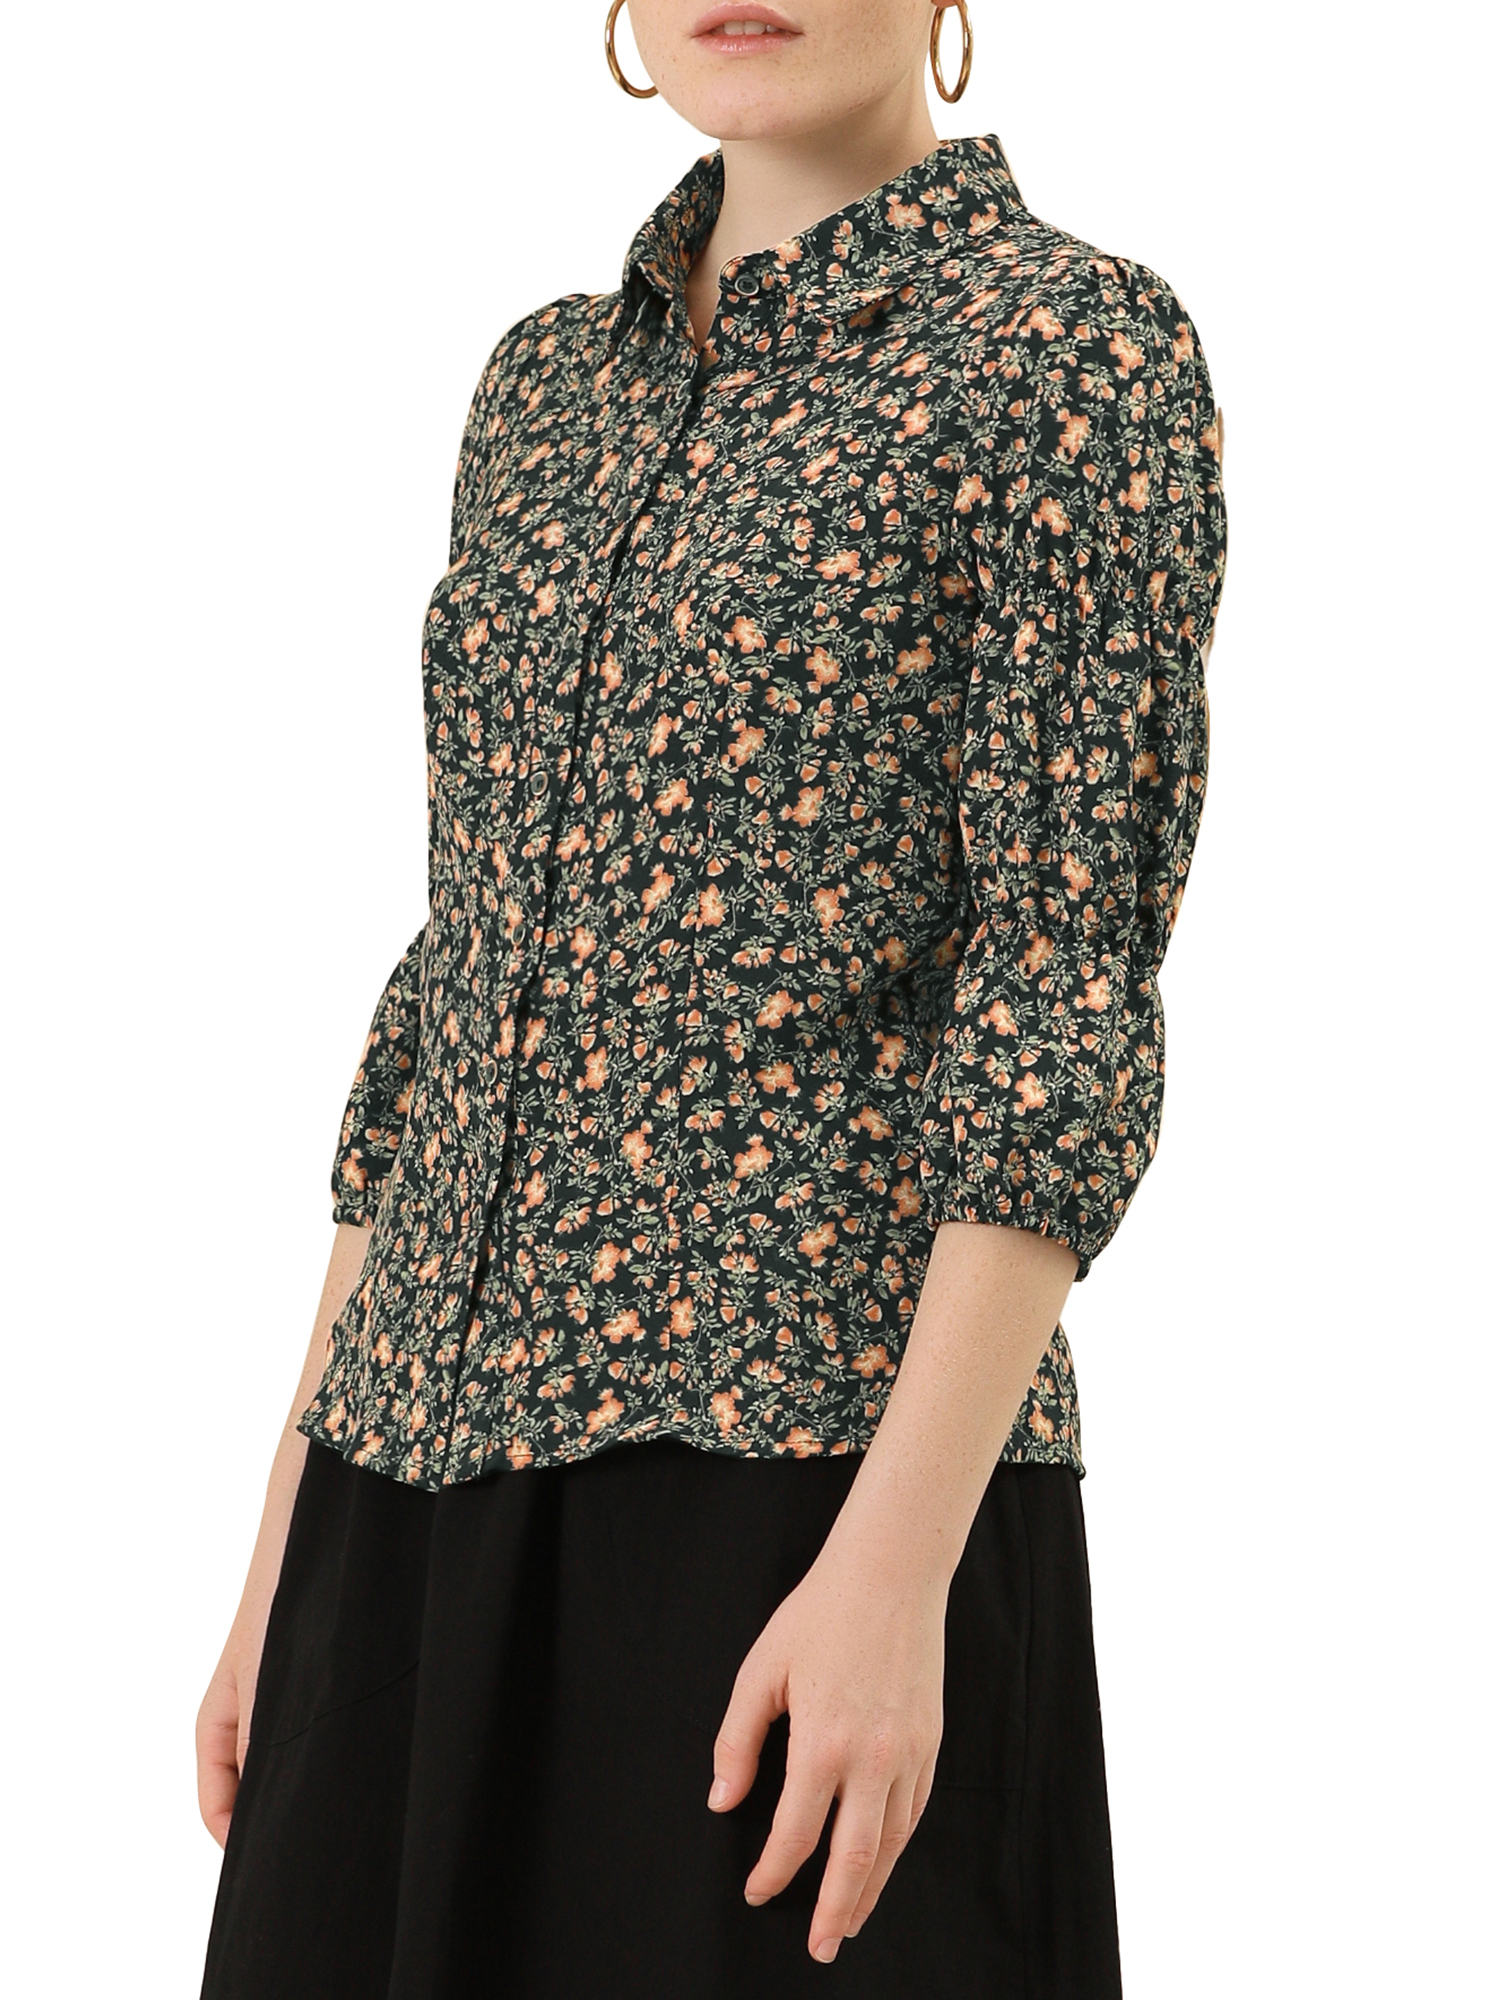 MODA NOVA Junior's Puff 3/4 Sleeves Button Up Peasant Floral Shirts - image 4 of 5